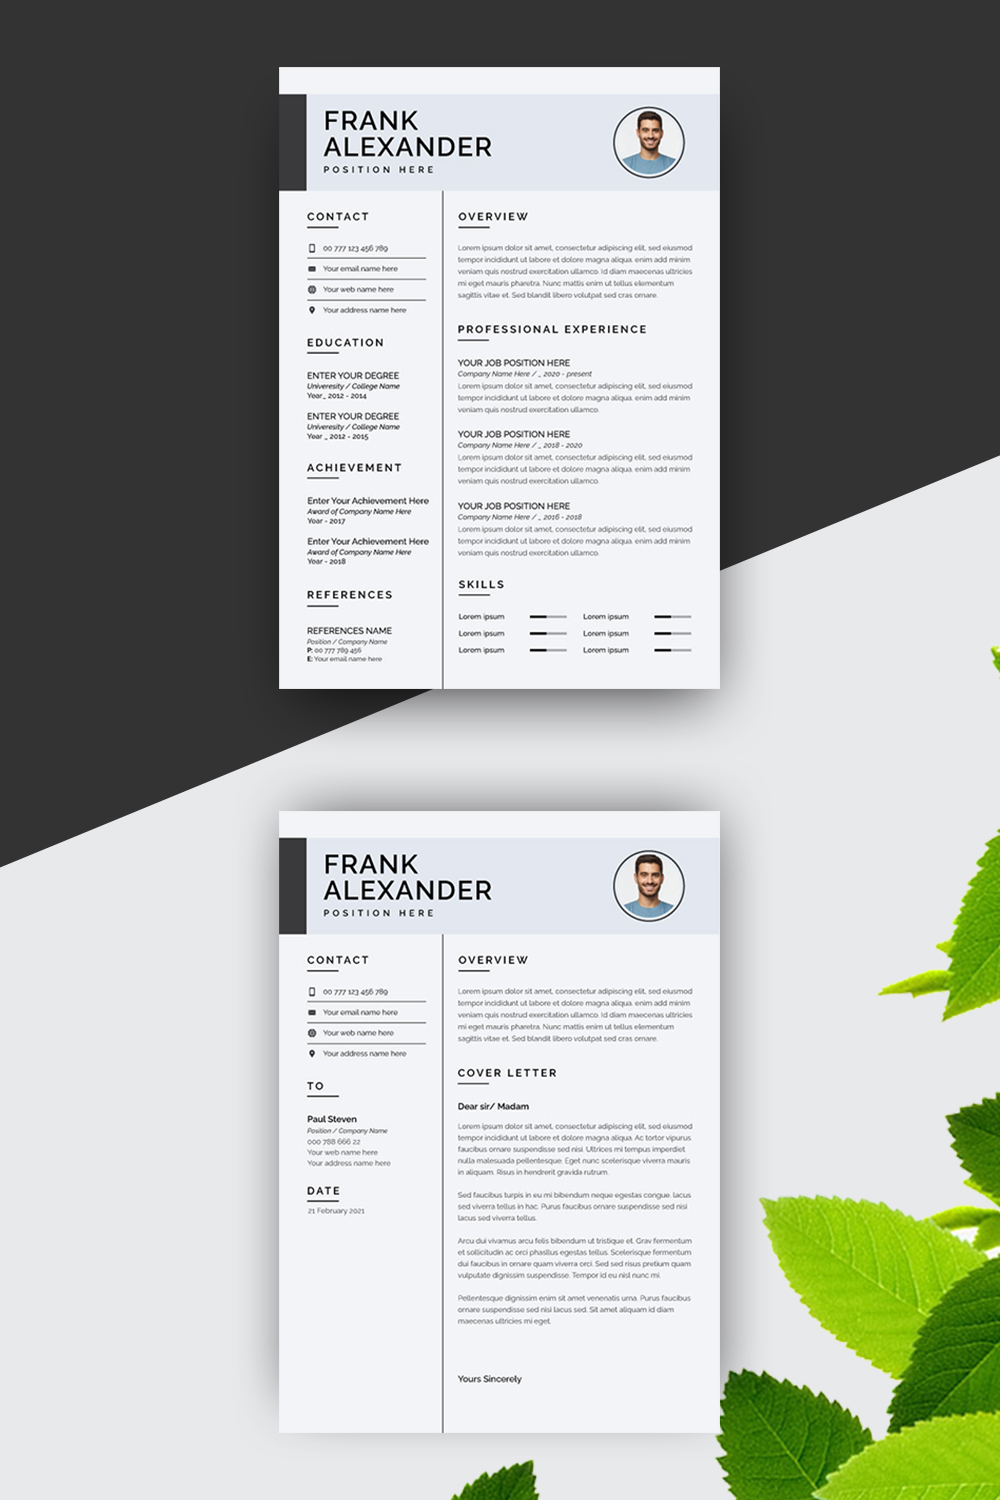 Two resume templates with green leaves on a black and white background.